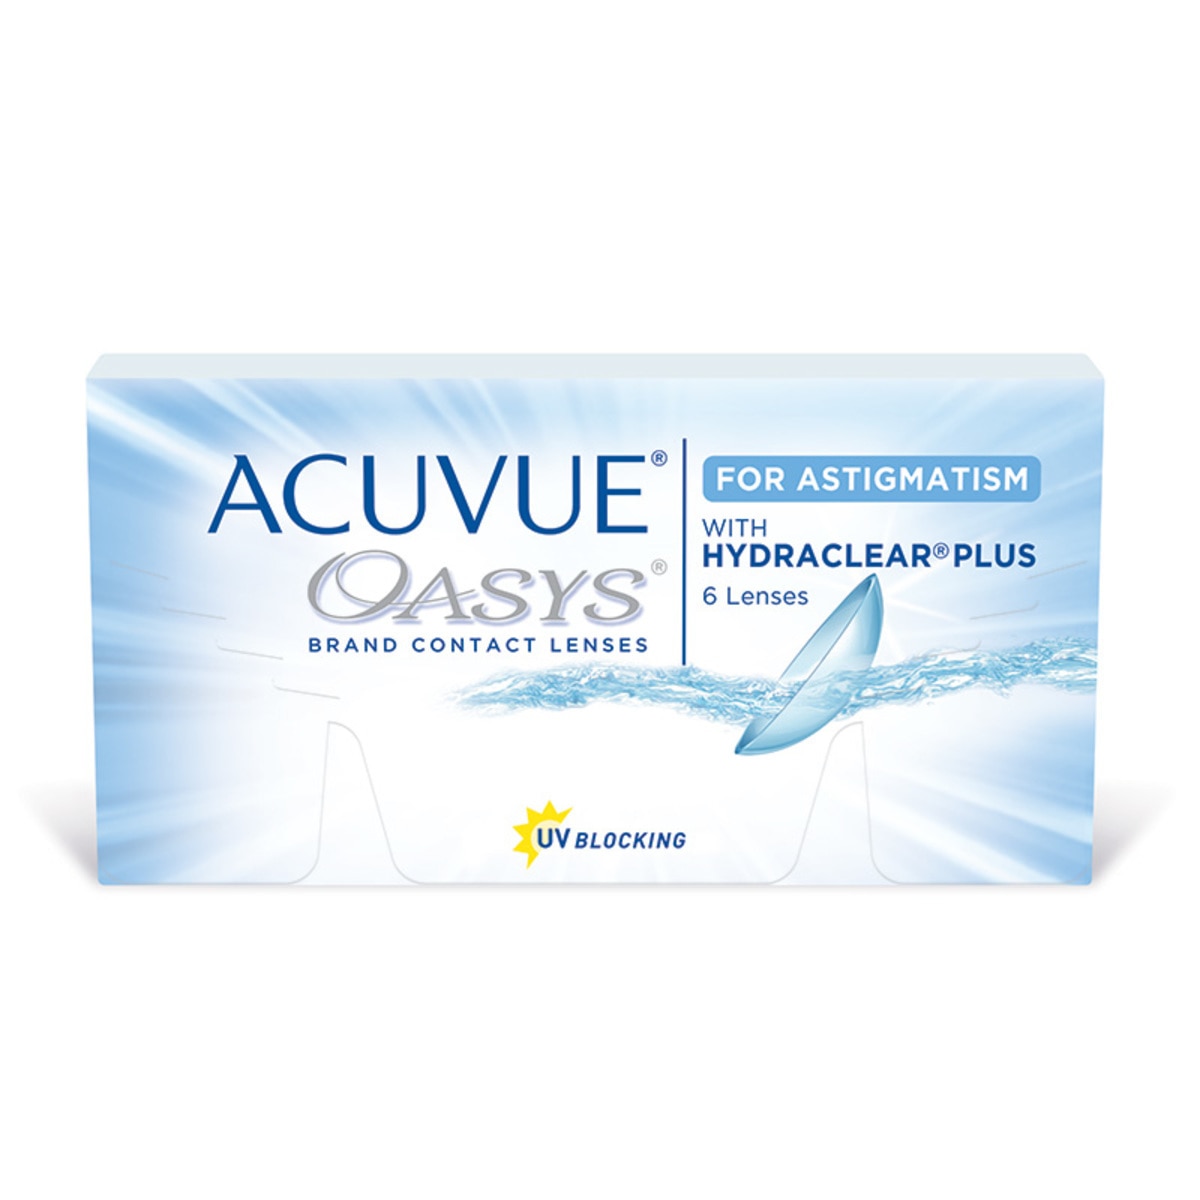 ACUVUE OASYS® con HYDRACLEAR Plus® para Astigmatismo (D -8.5, Cyl/Axis -1.75/100)